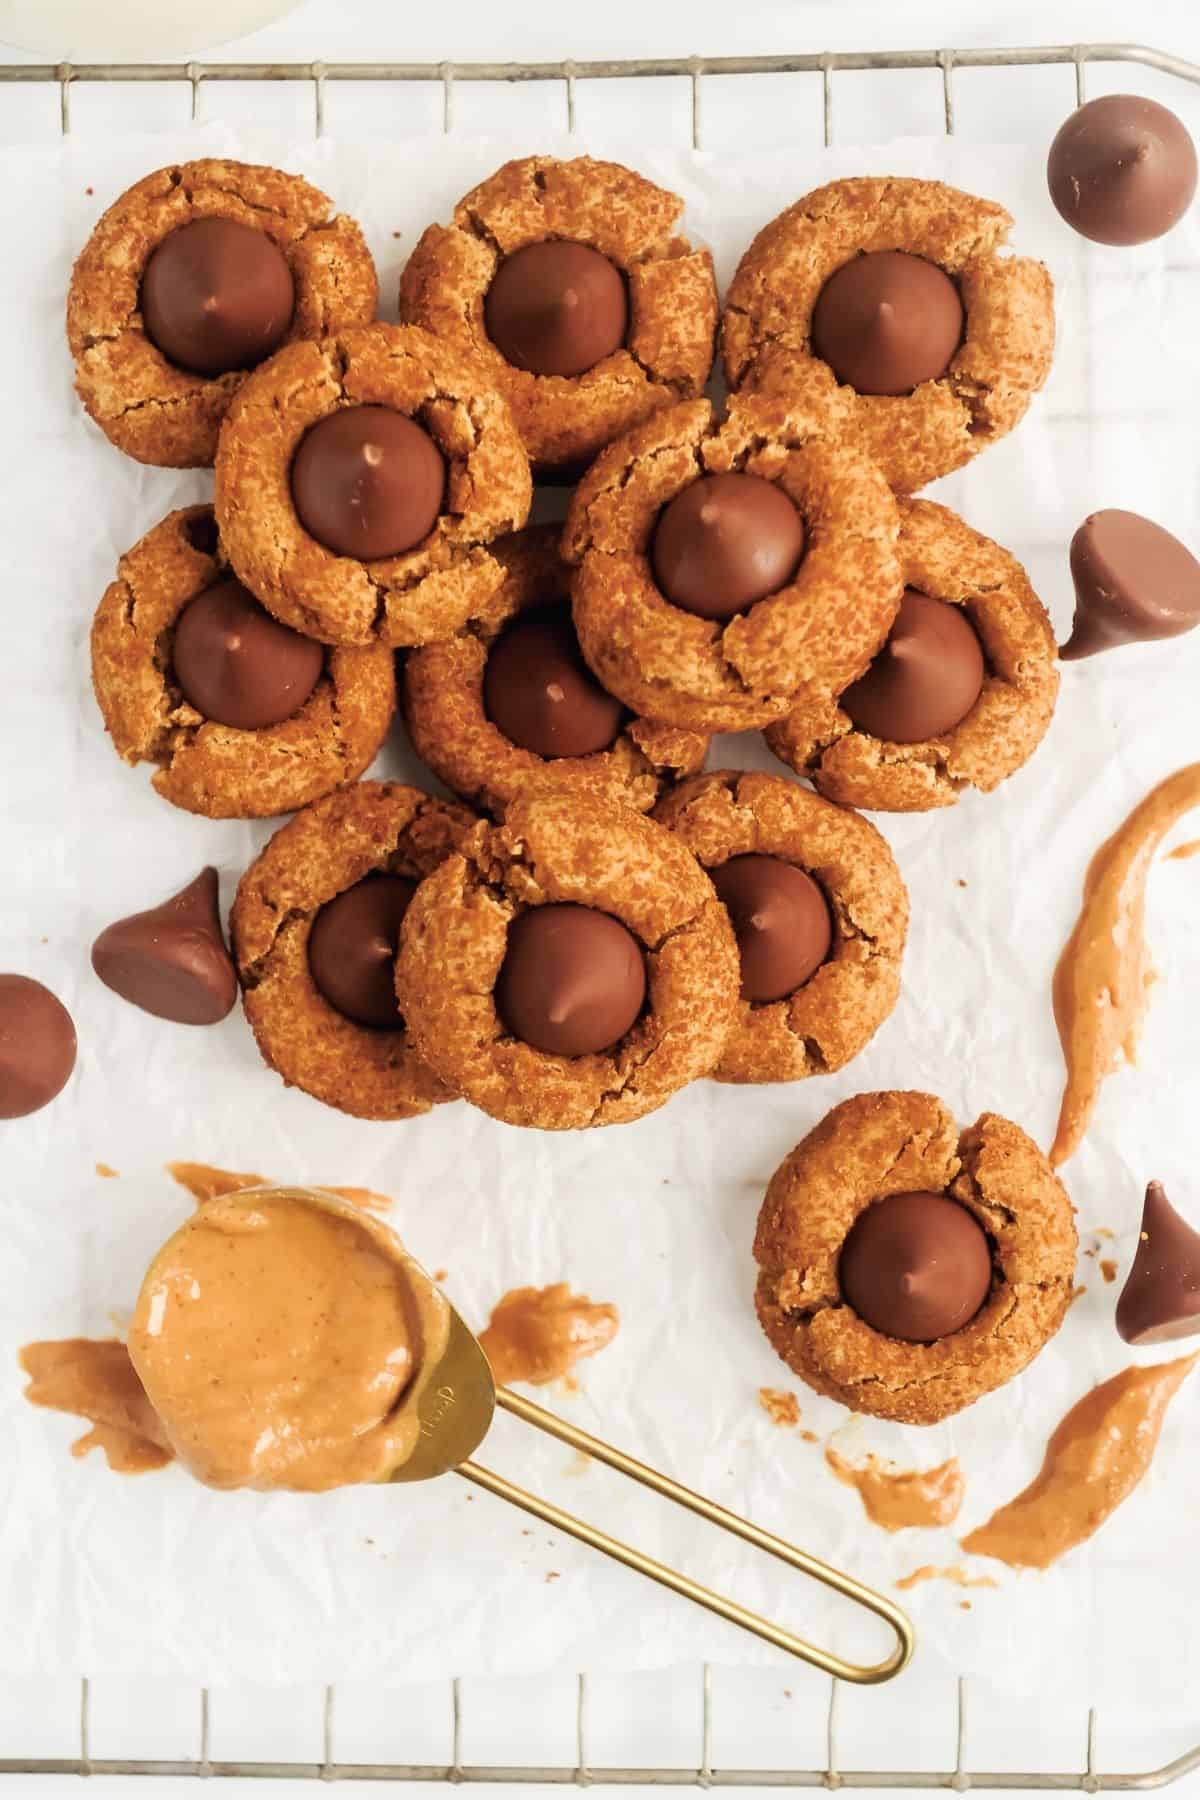 These healthier peanut butter blossoms are a Hershey kiss cookie recipe that is gluten free and easy to make.  Perfect for Christmas cookie exchanges or to freeze and serve for holiday guests.